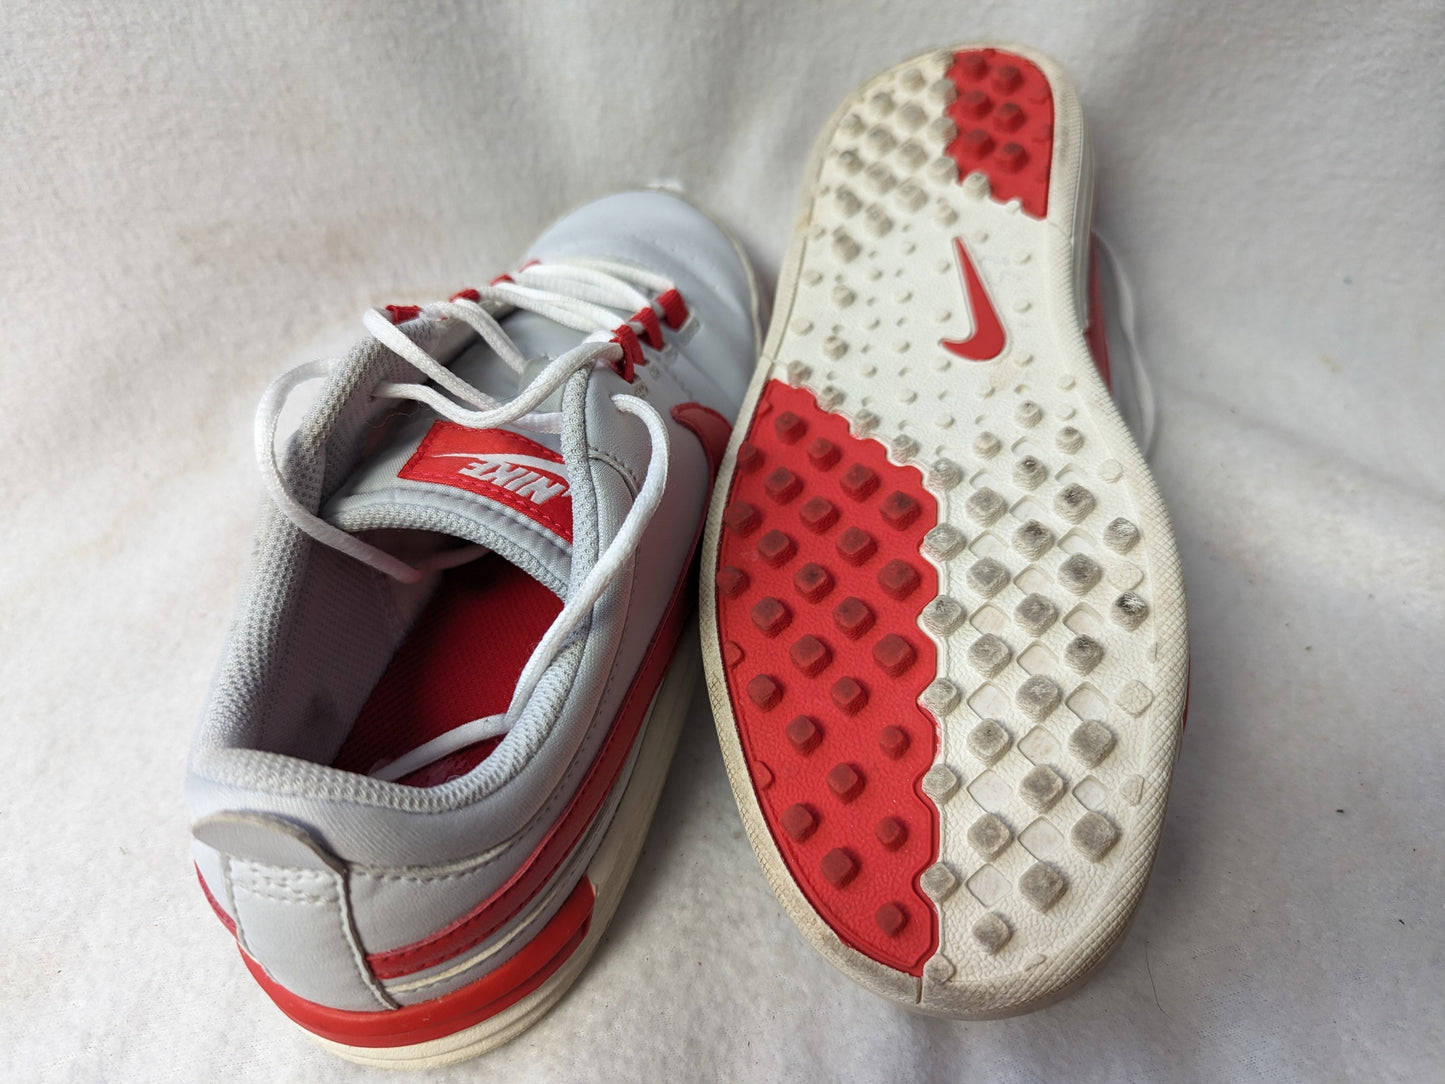 Nike Youth VT Golf Shoes Size 5 Color White Condition Used